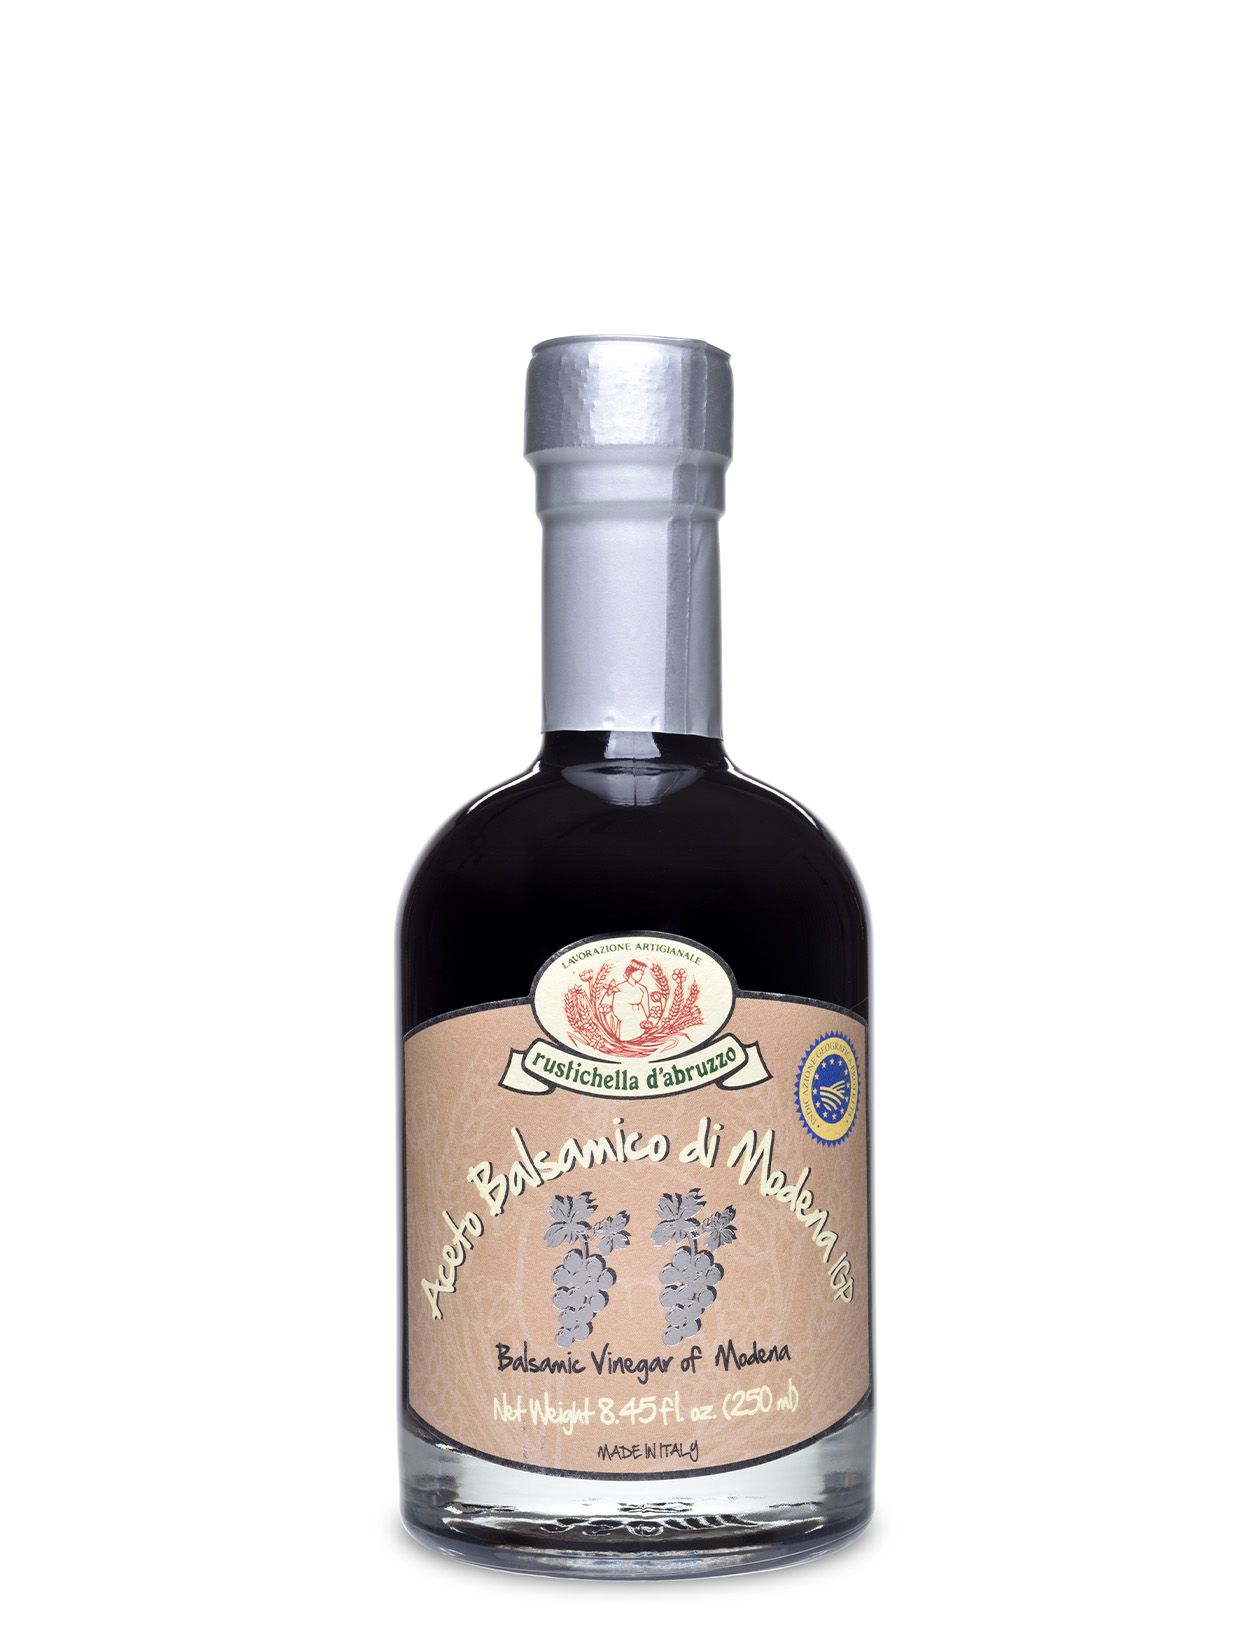 Balsamic Vinegar from Modena IGP - Silver Grapes